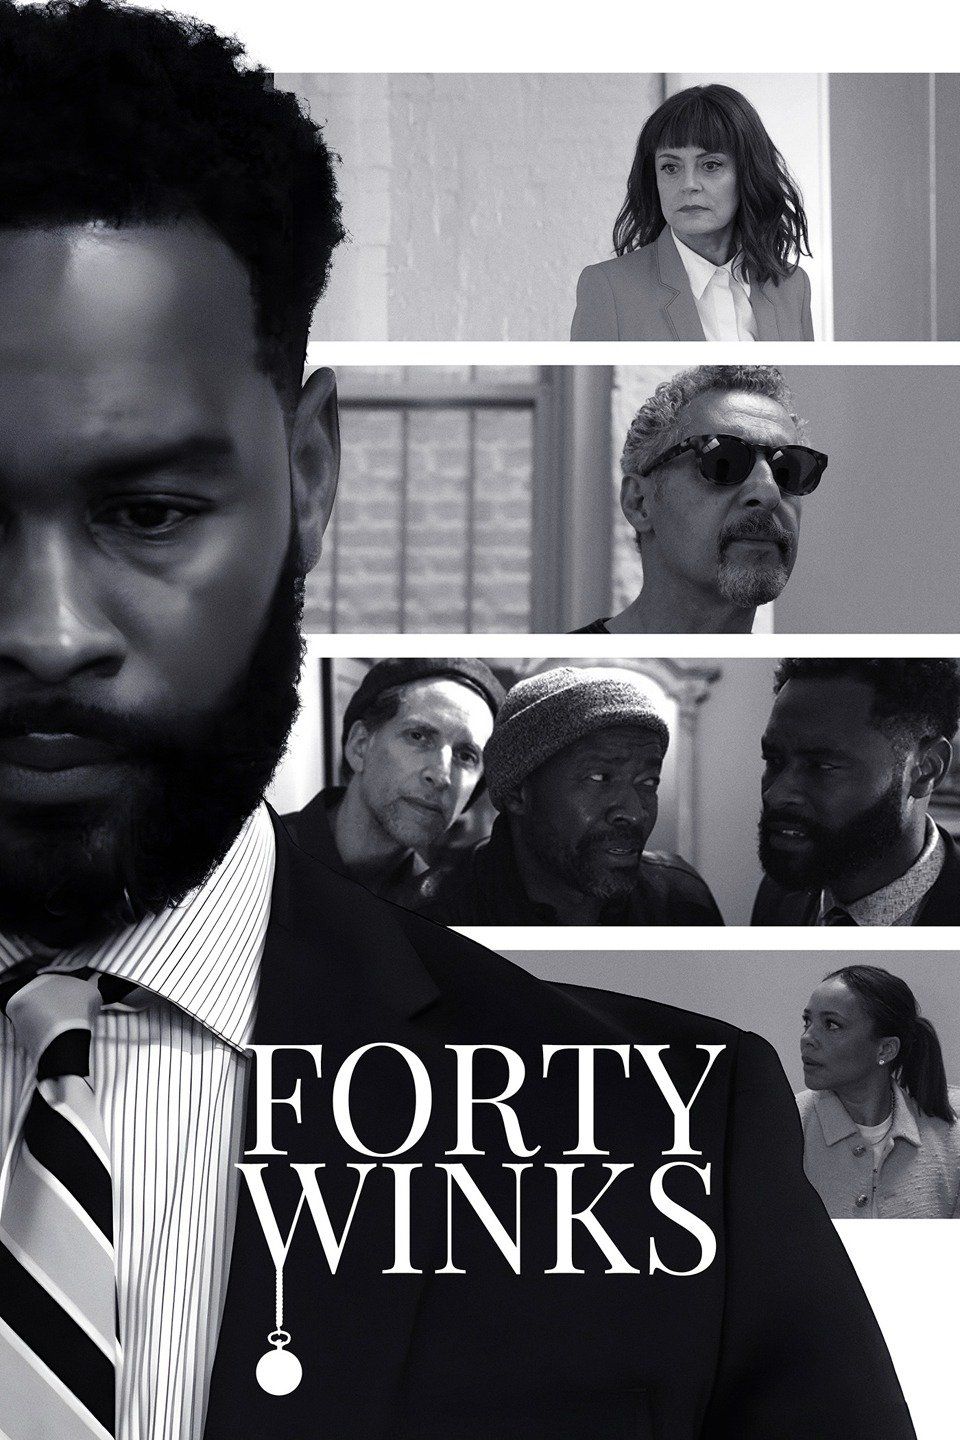 Forty Winks - movie: where to watch streaming online